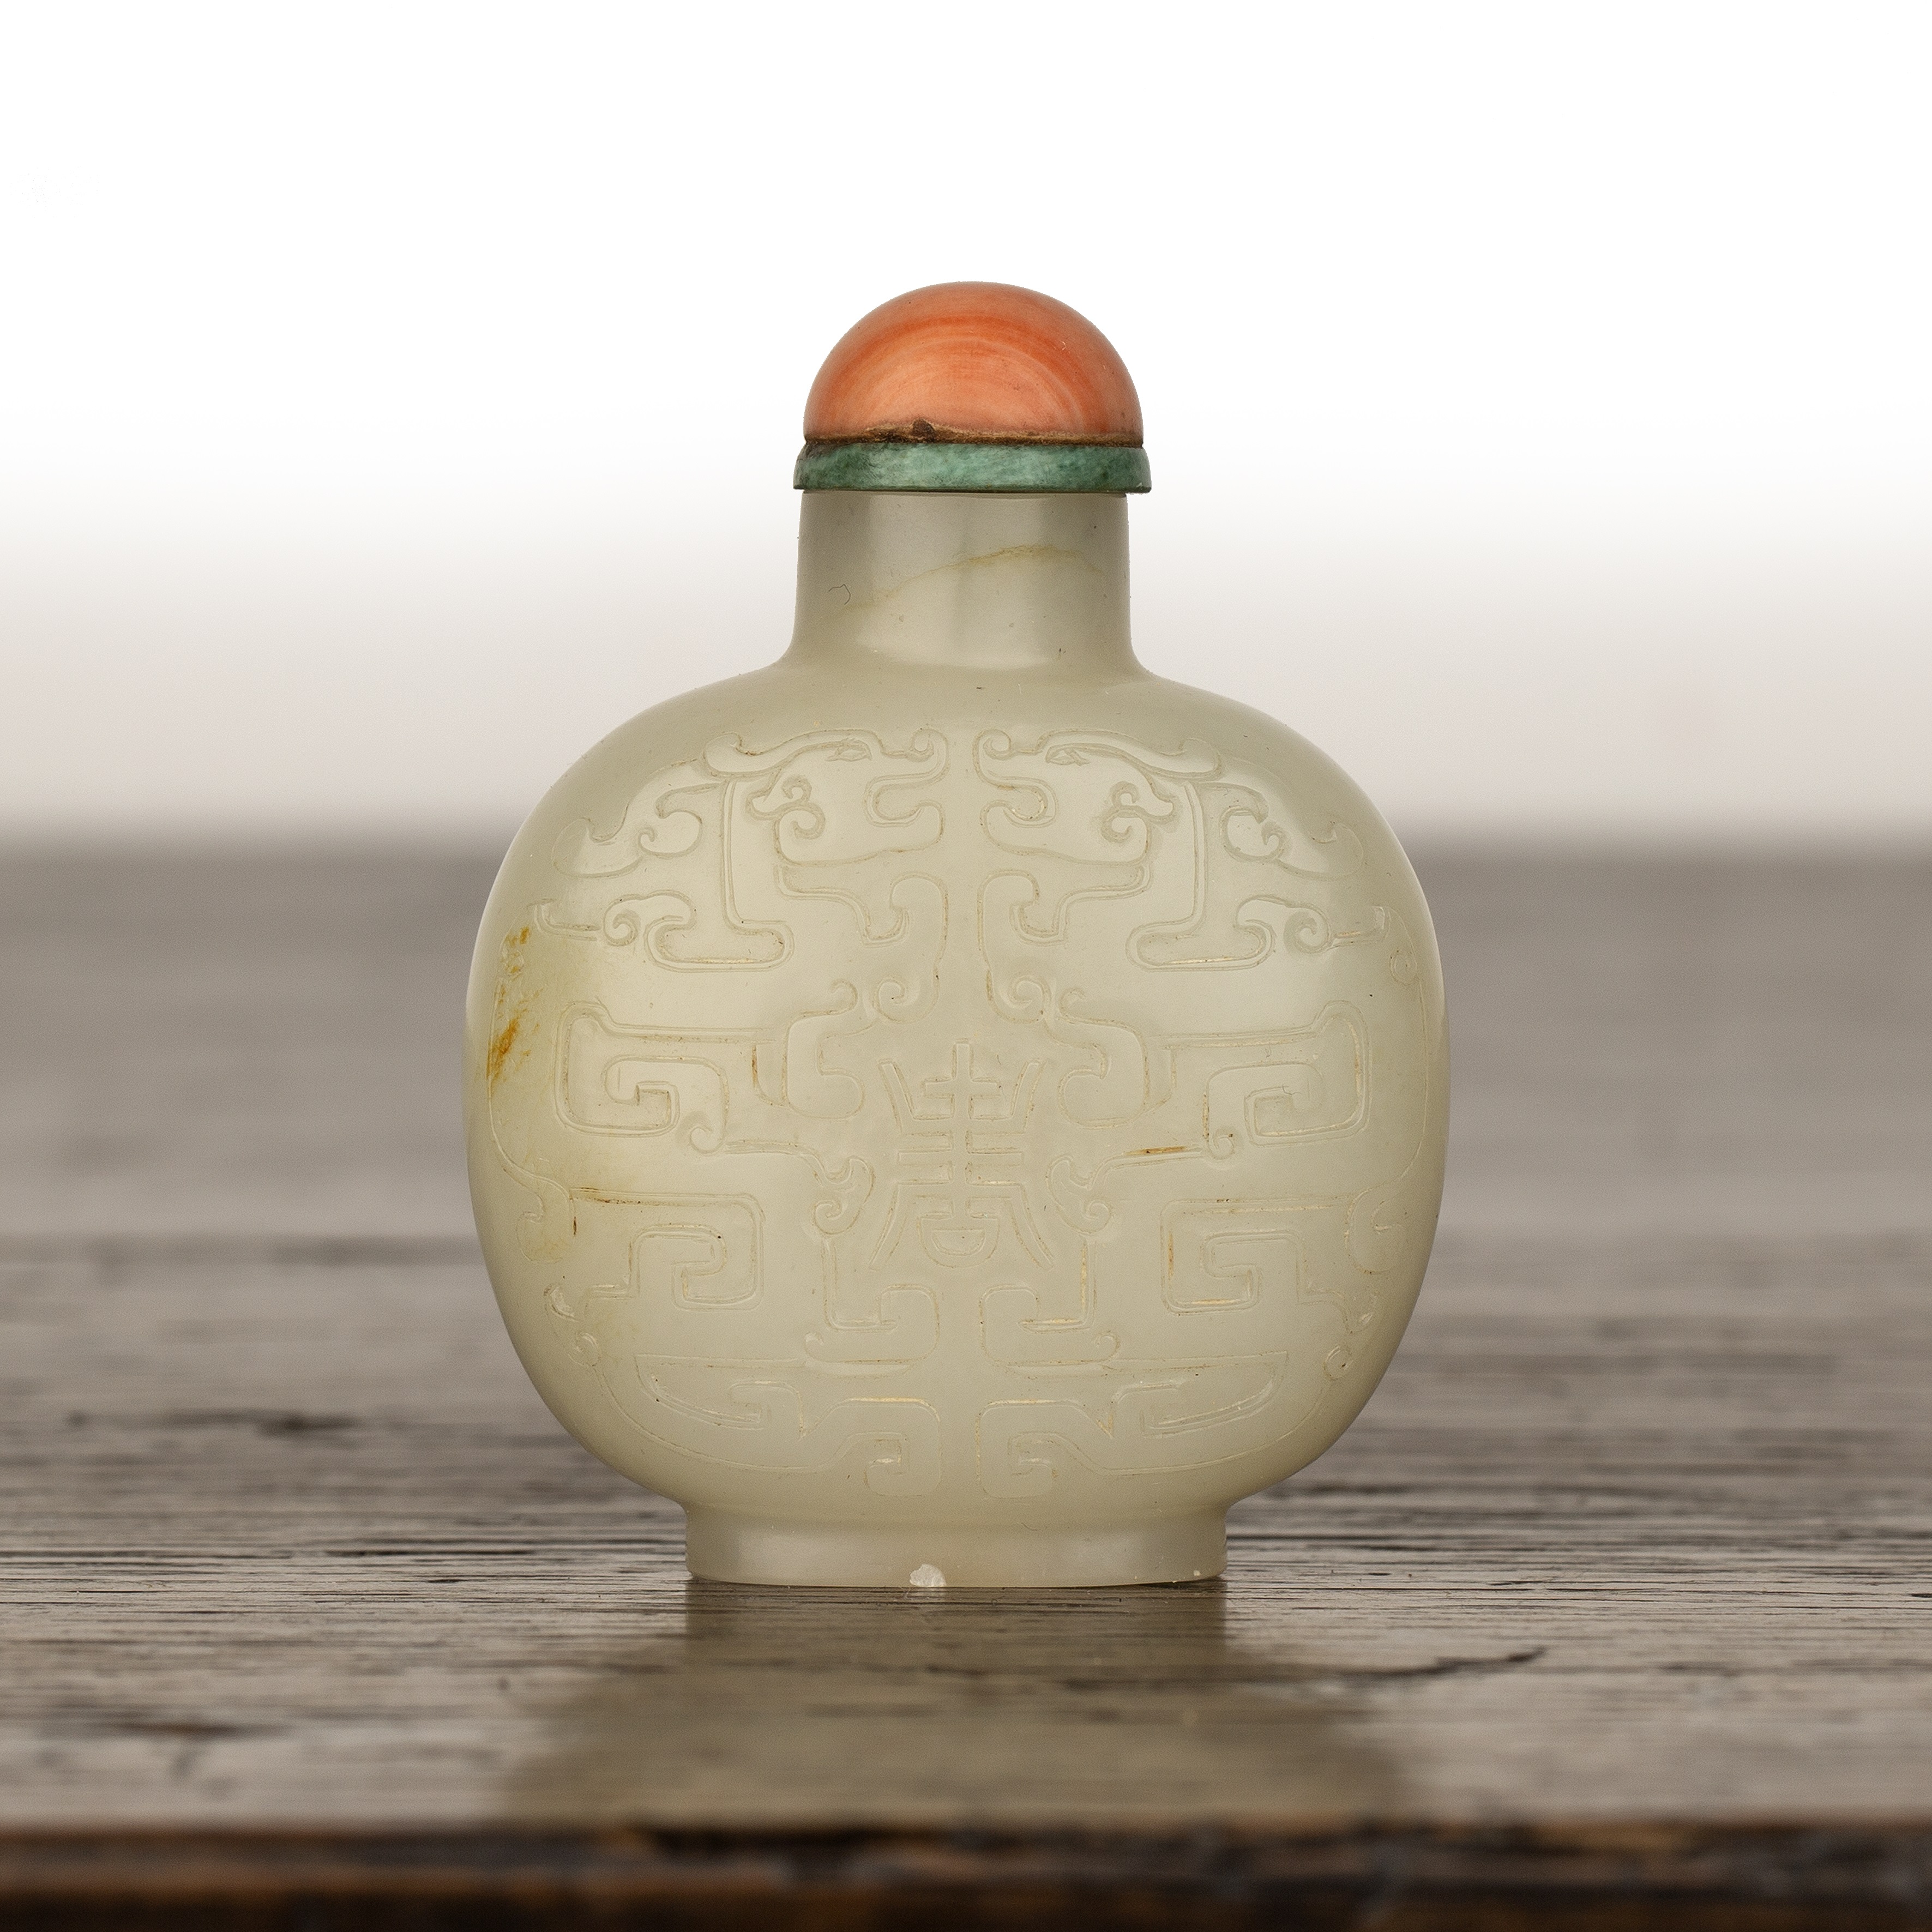 Greyish white nephrite jade snuff bottle Chinese, 1750-1780 of well hollowed flattened rounded